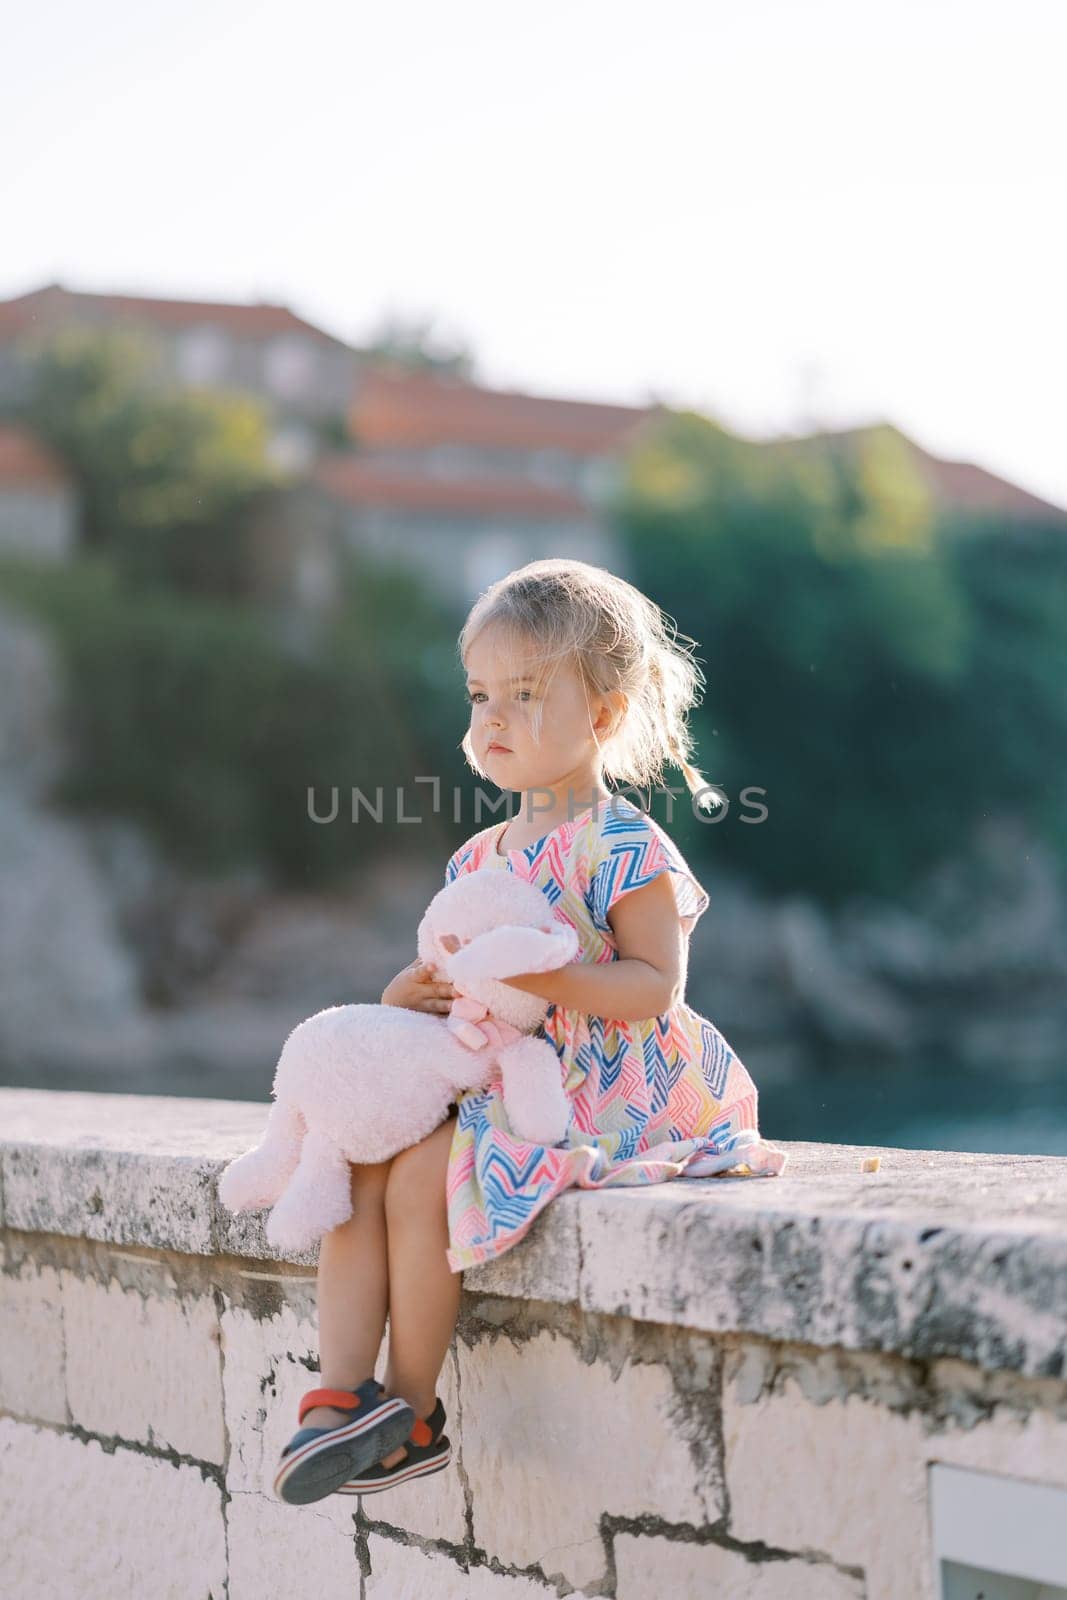 Little girl with a soft toy sits on a stone fence and looks ahead. High quality photo